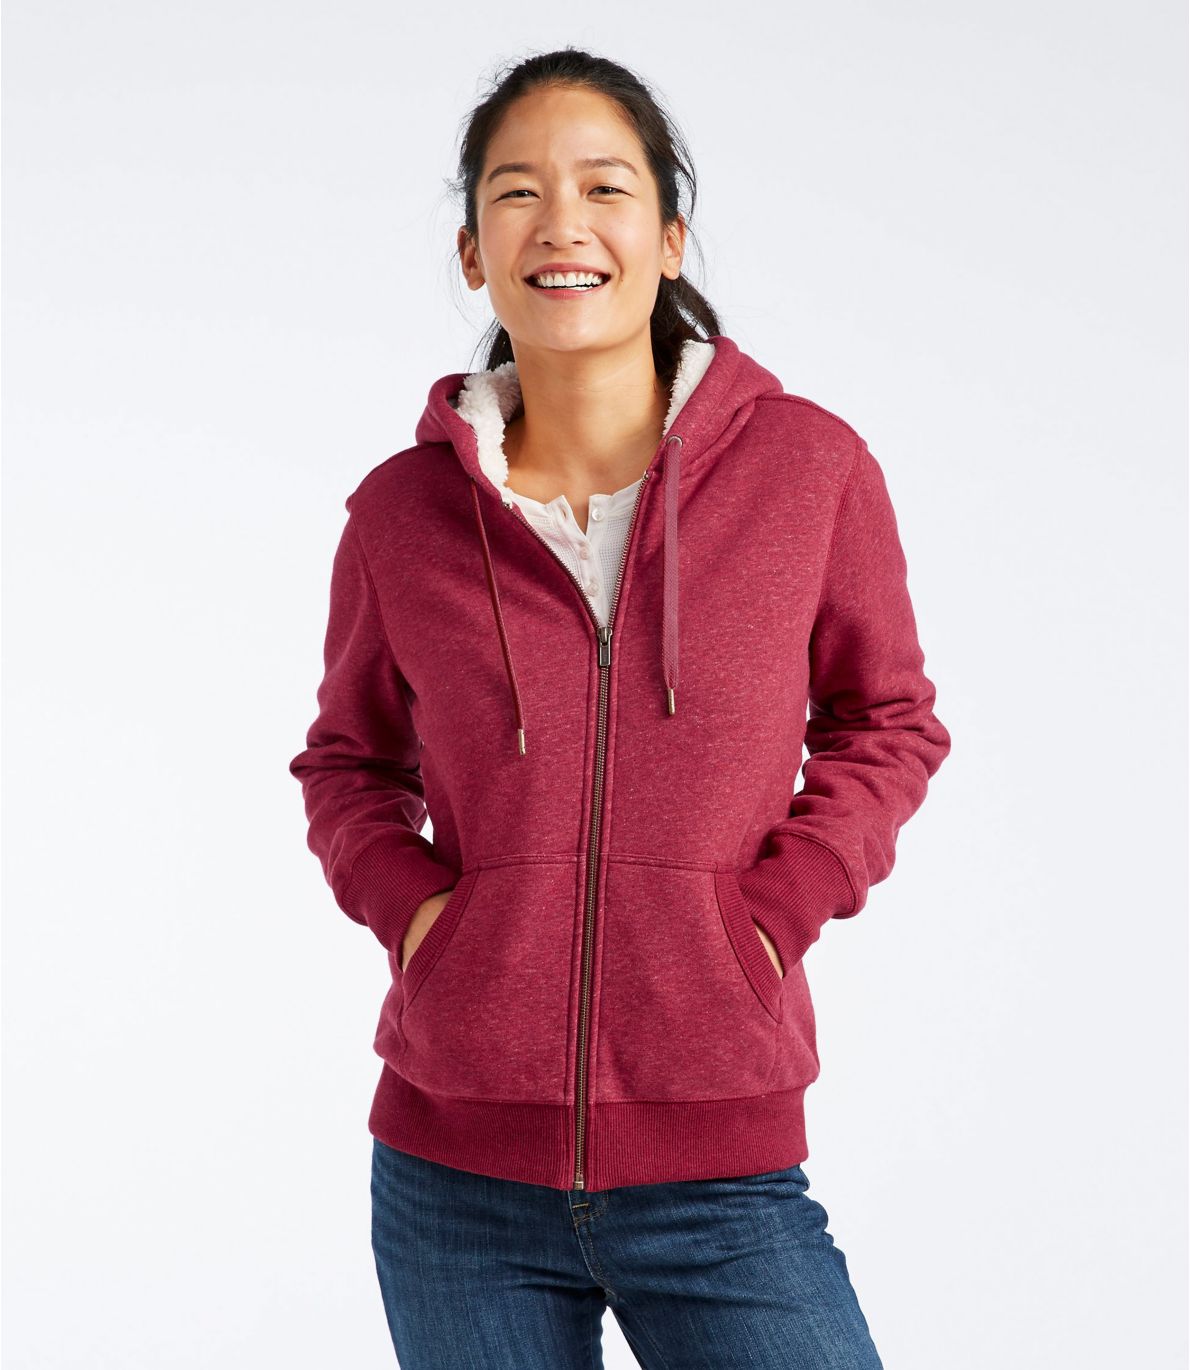 Women's Sherpa-Lined Hoodie at L.L. Bean